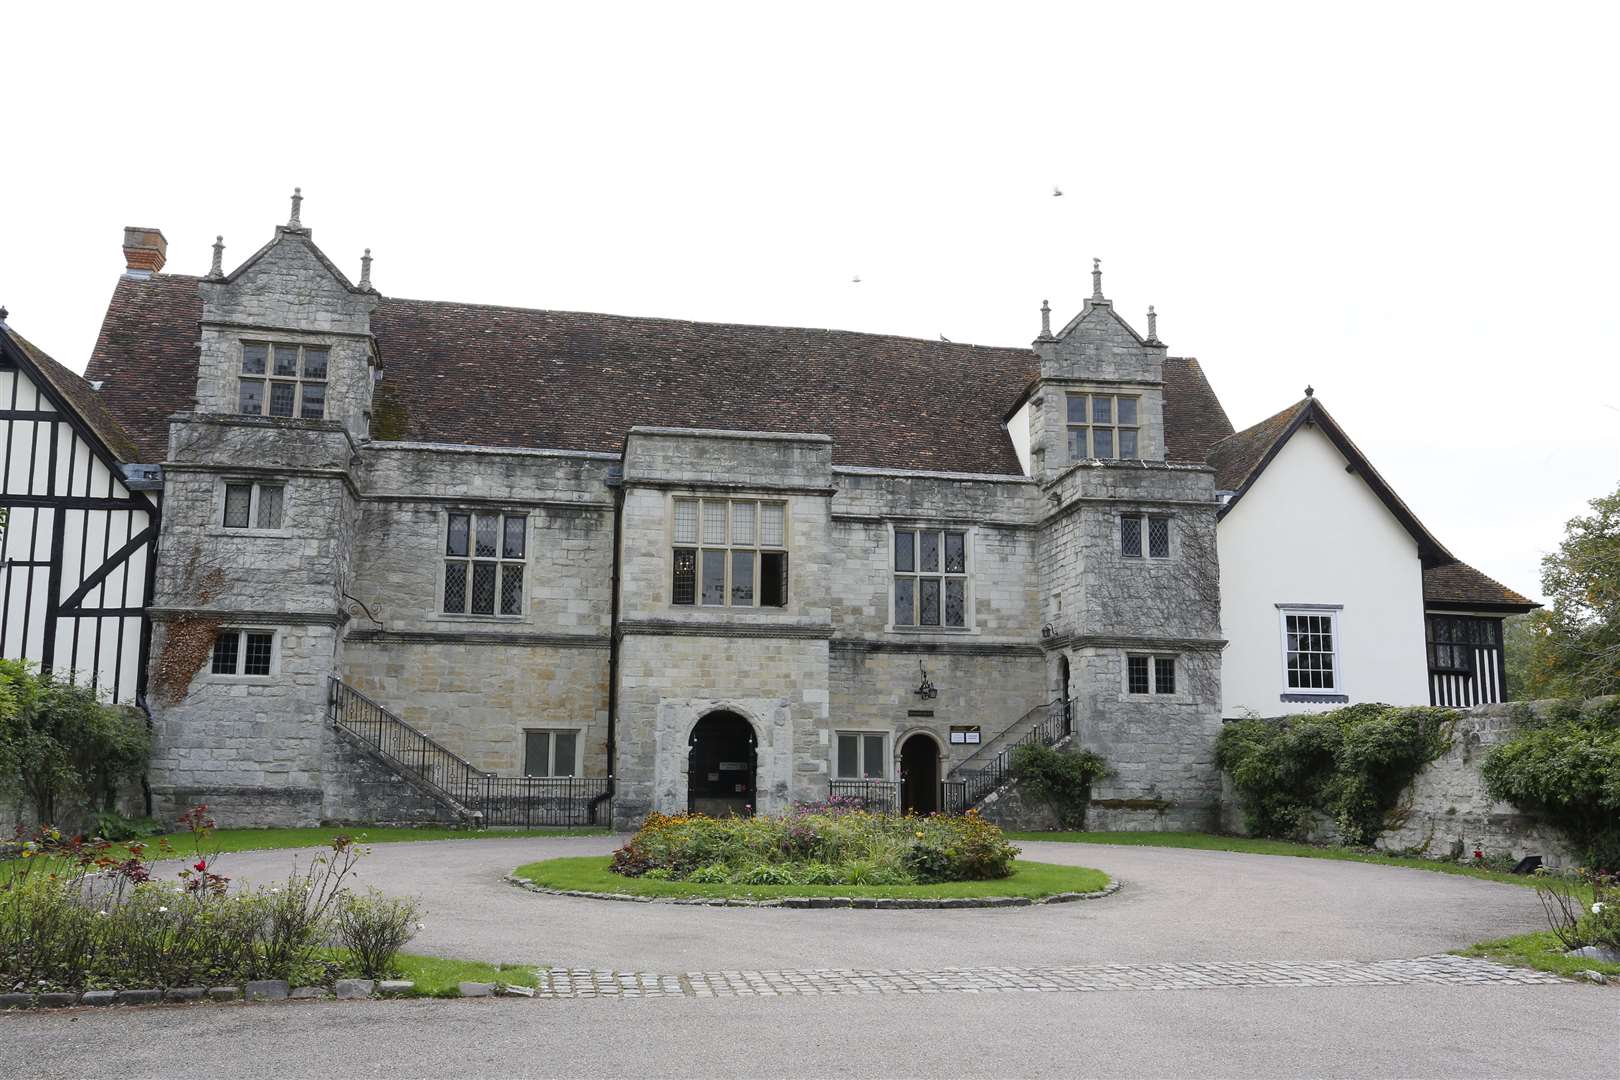 The inquest was held at Archbishop’s Palace, Maidstone